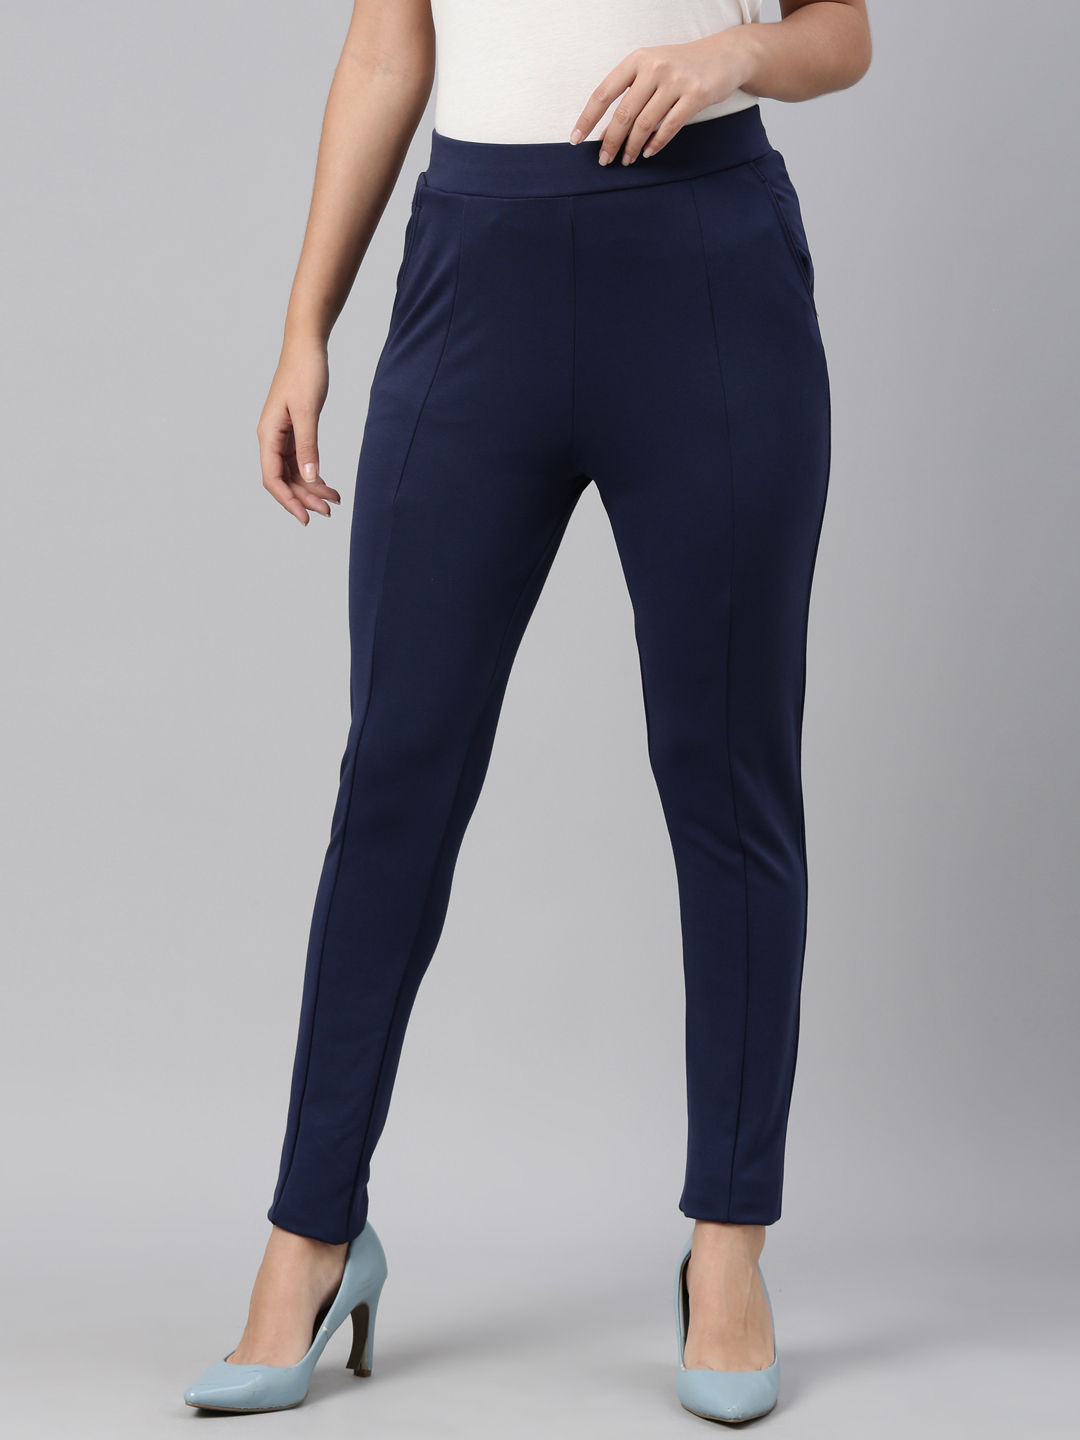 AND Trousers and Pants  Buy AND Navy Blue Work Pants Online  Nykaa Fashion